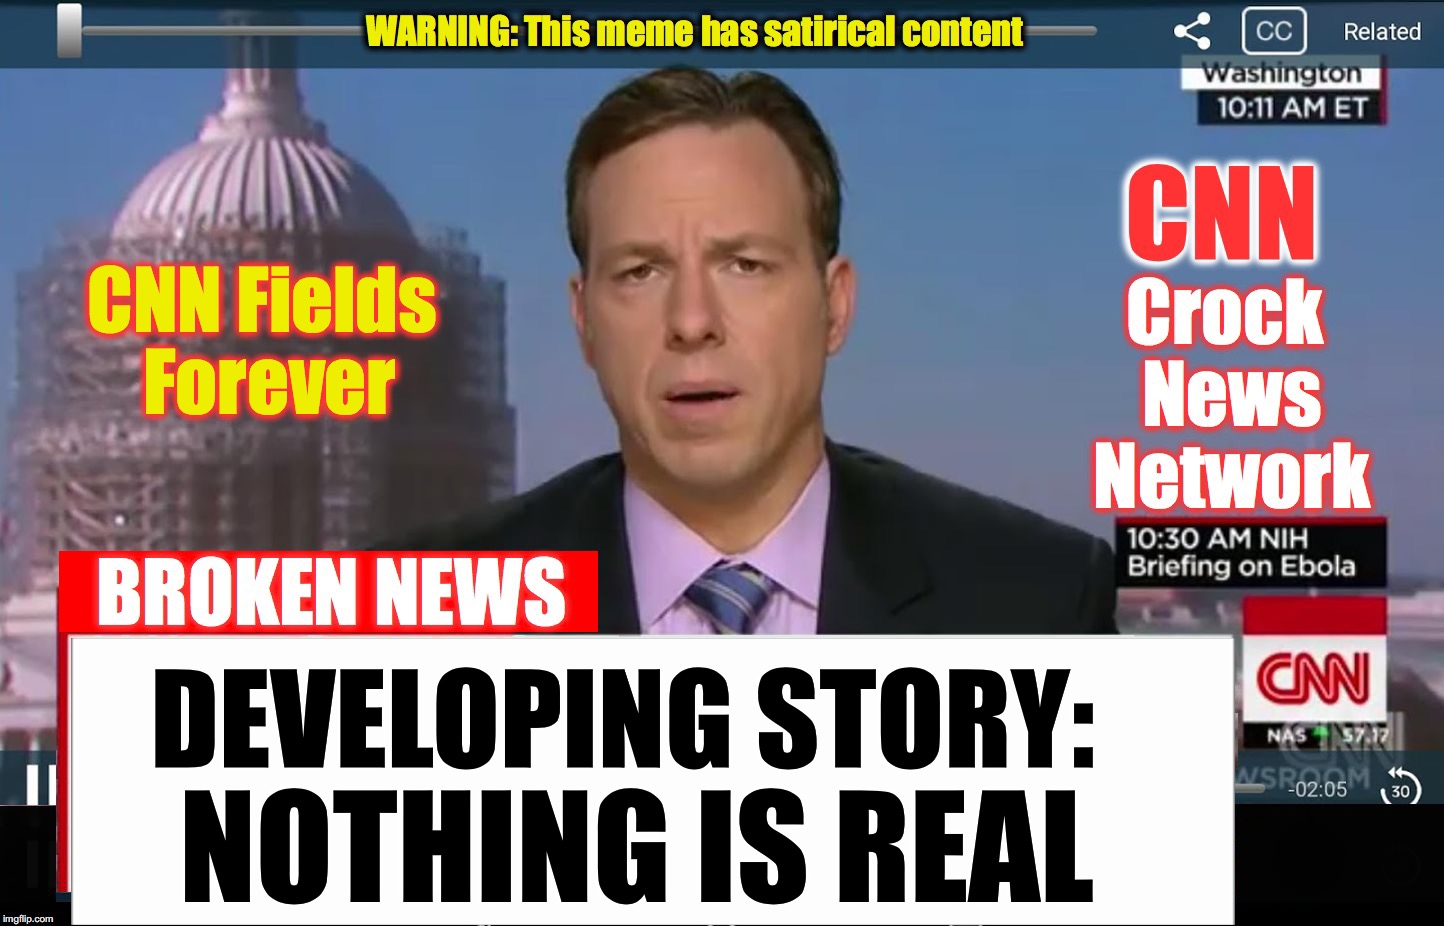 Let them take you down, cause they're going to | CNN Fields Forever; DEVELOPING STORY:; NOTHING IS REAL | image tagged in cnn crock news network | made w/ Imgflip meme maker